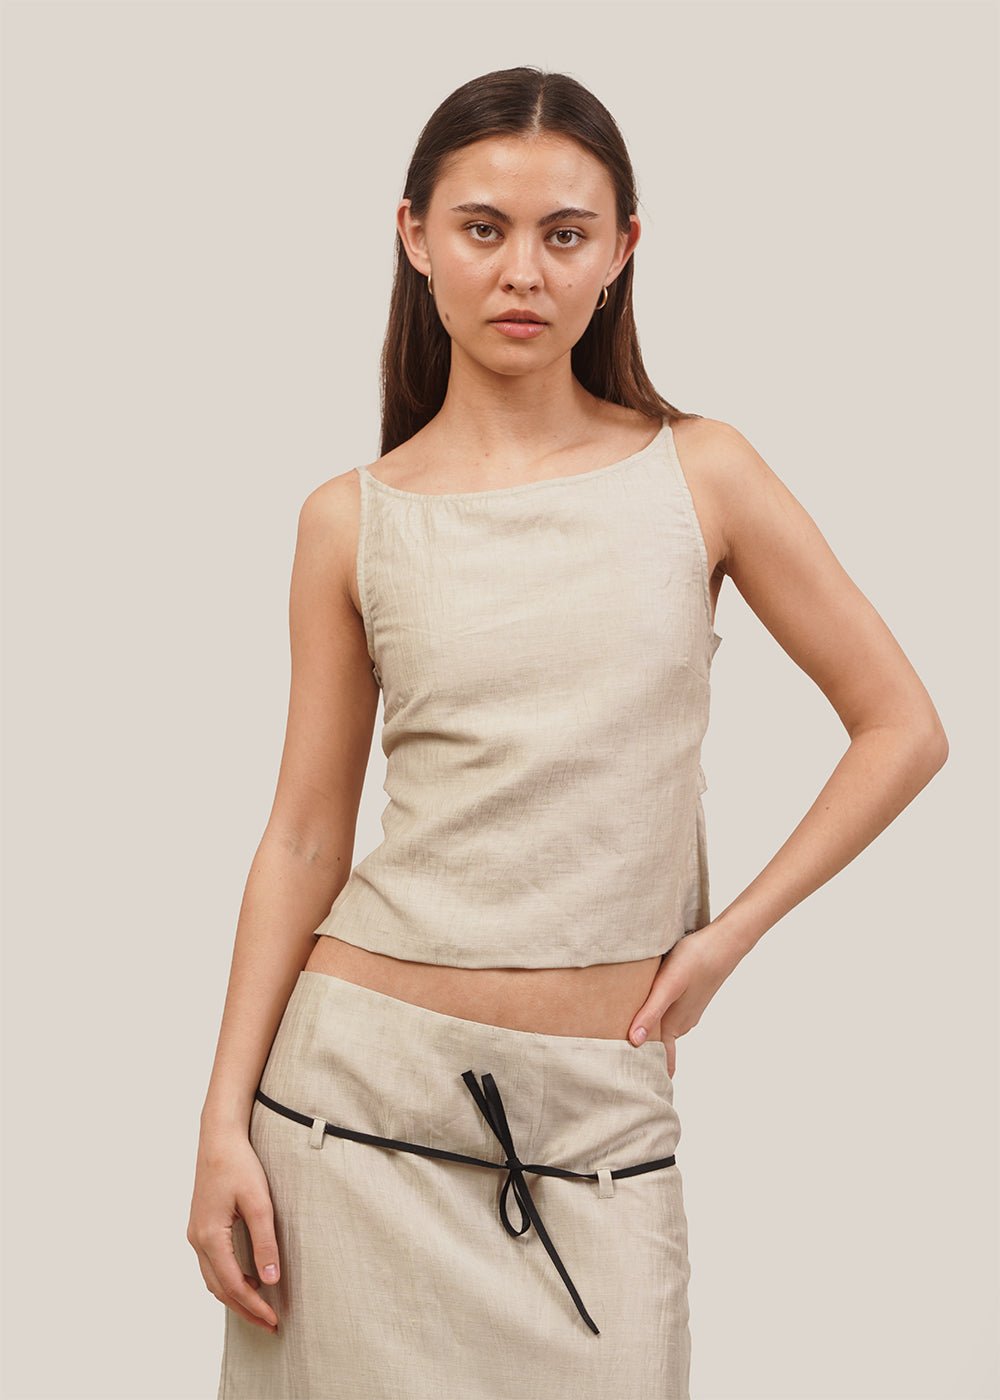 https://newclassics.ca/cdn/shop/products/paloma-wool-haizea-tank-top-new-classics-studios-sustainable-and-ethical-fashion-canada-493176_1000x.jpg?v=1687282027